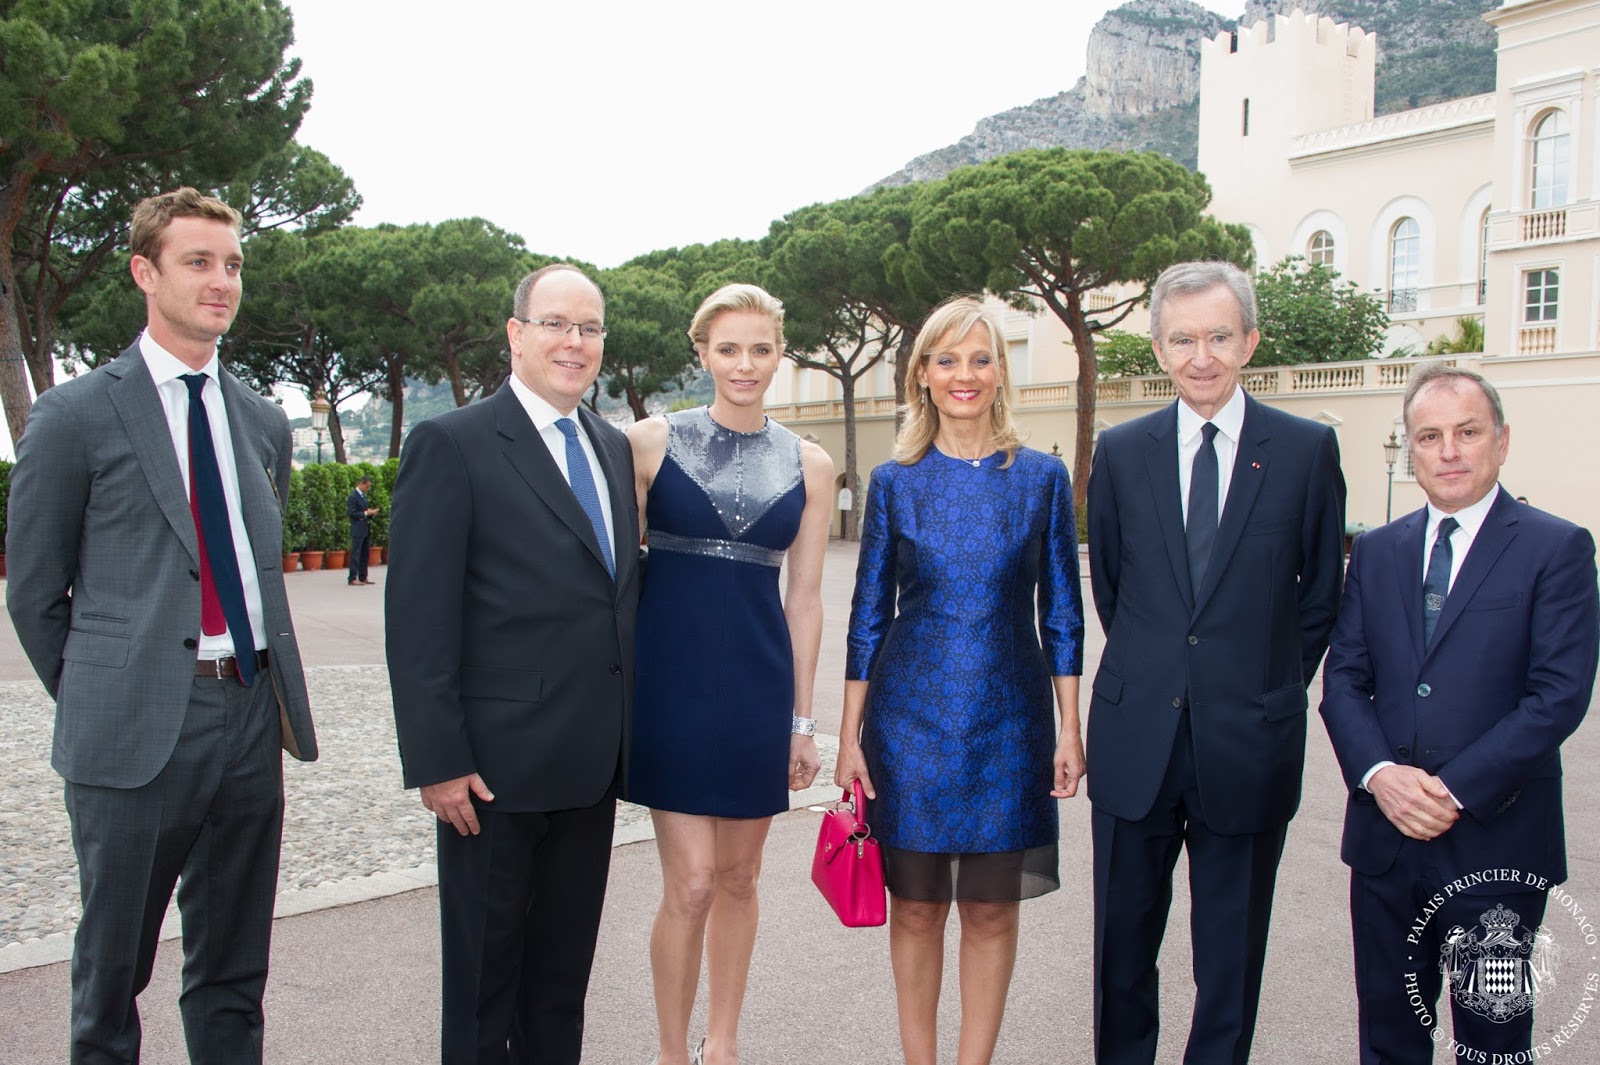 Princess Charlene Welcomes Louis Vuitton in Monaco | The Royal Couturier